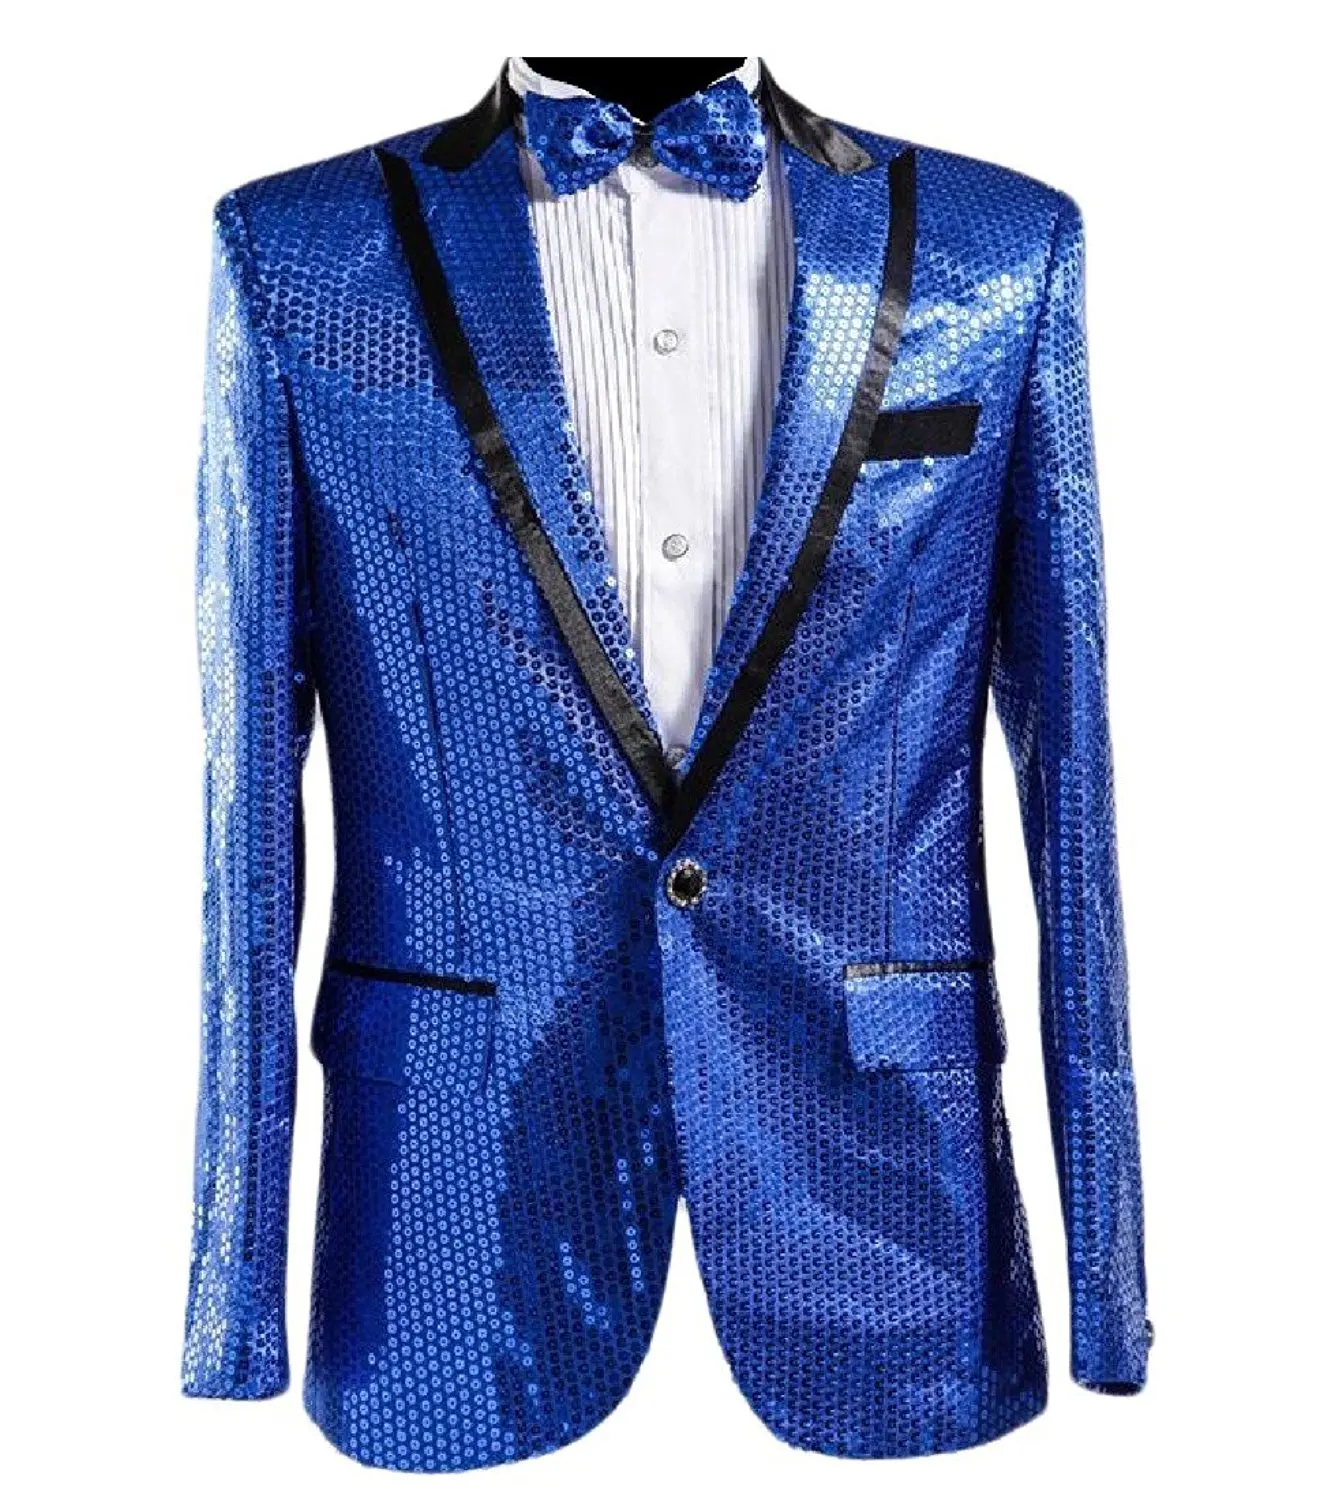 Cheap Shiny Down Suit, find Shiny Down Suit deals on line at Alibaba.com